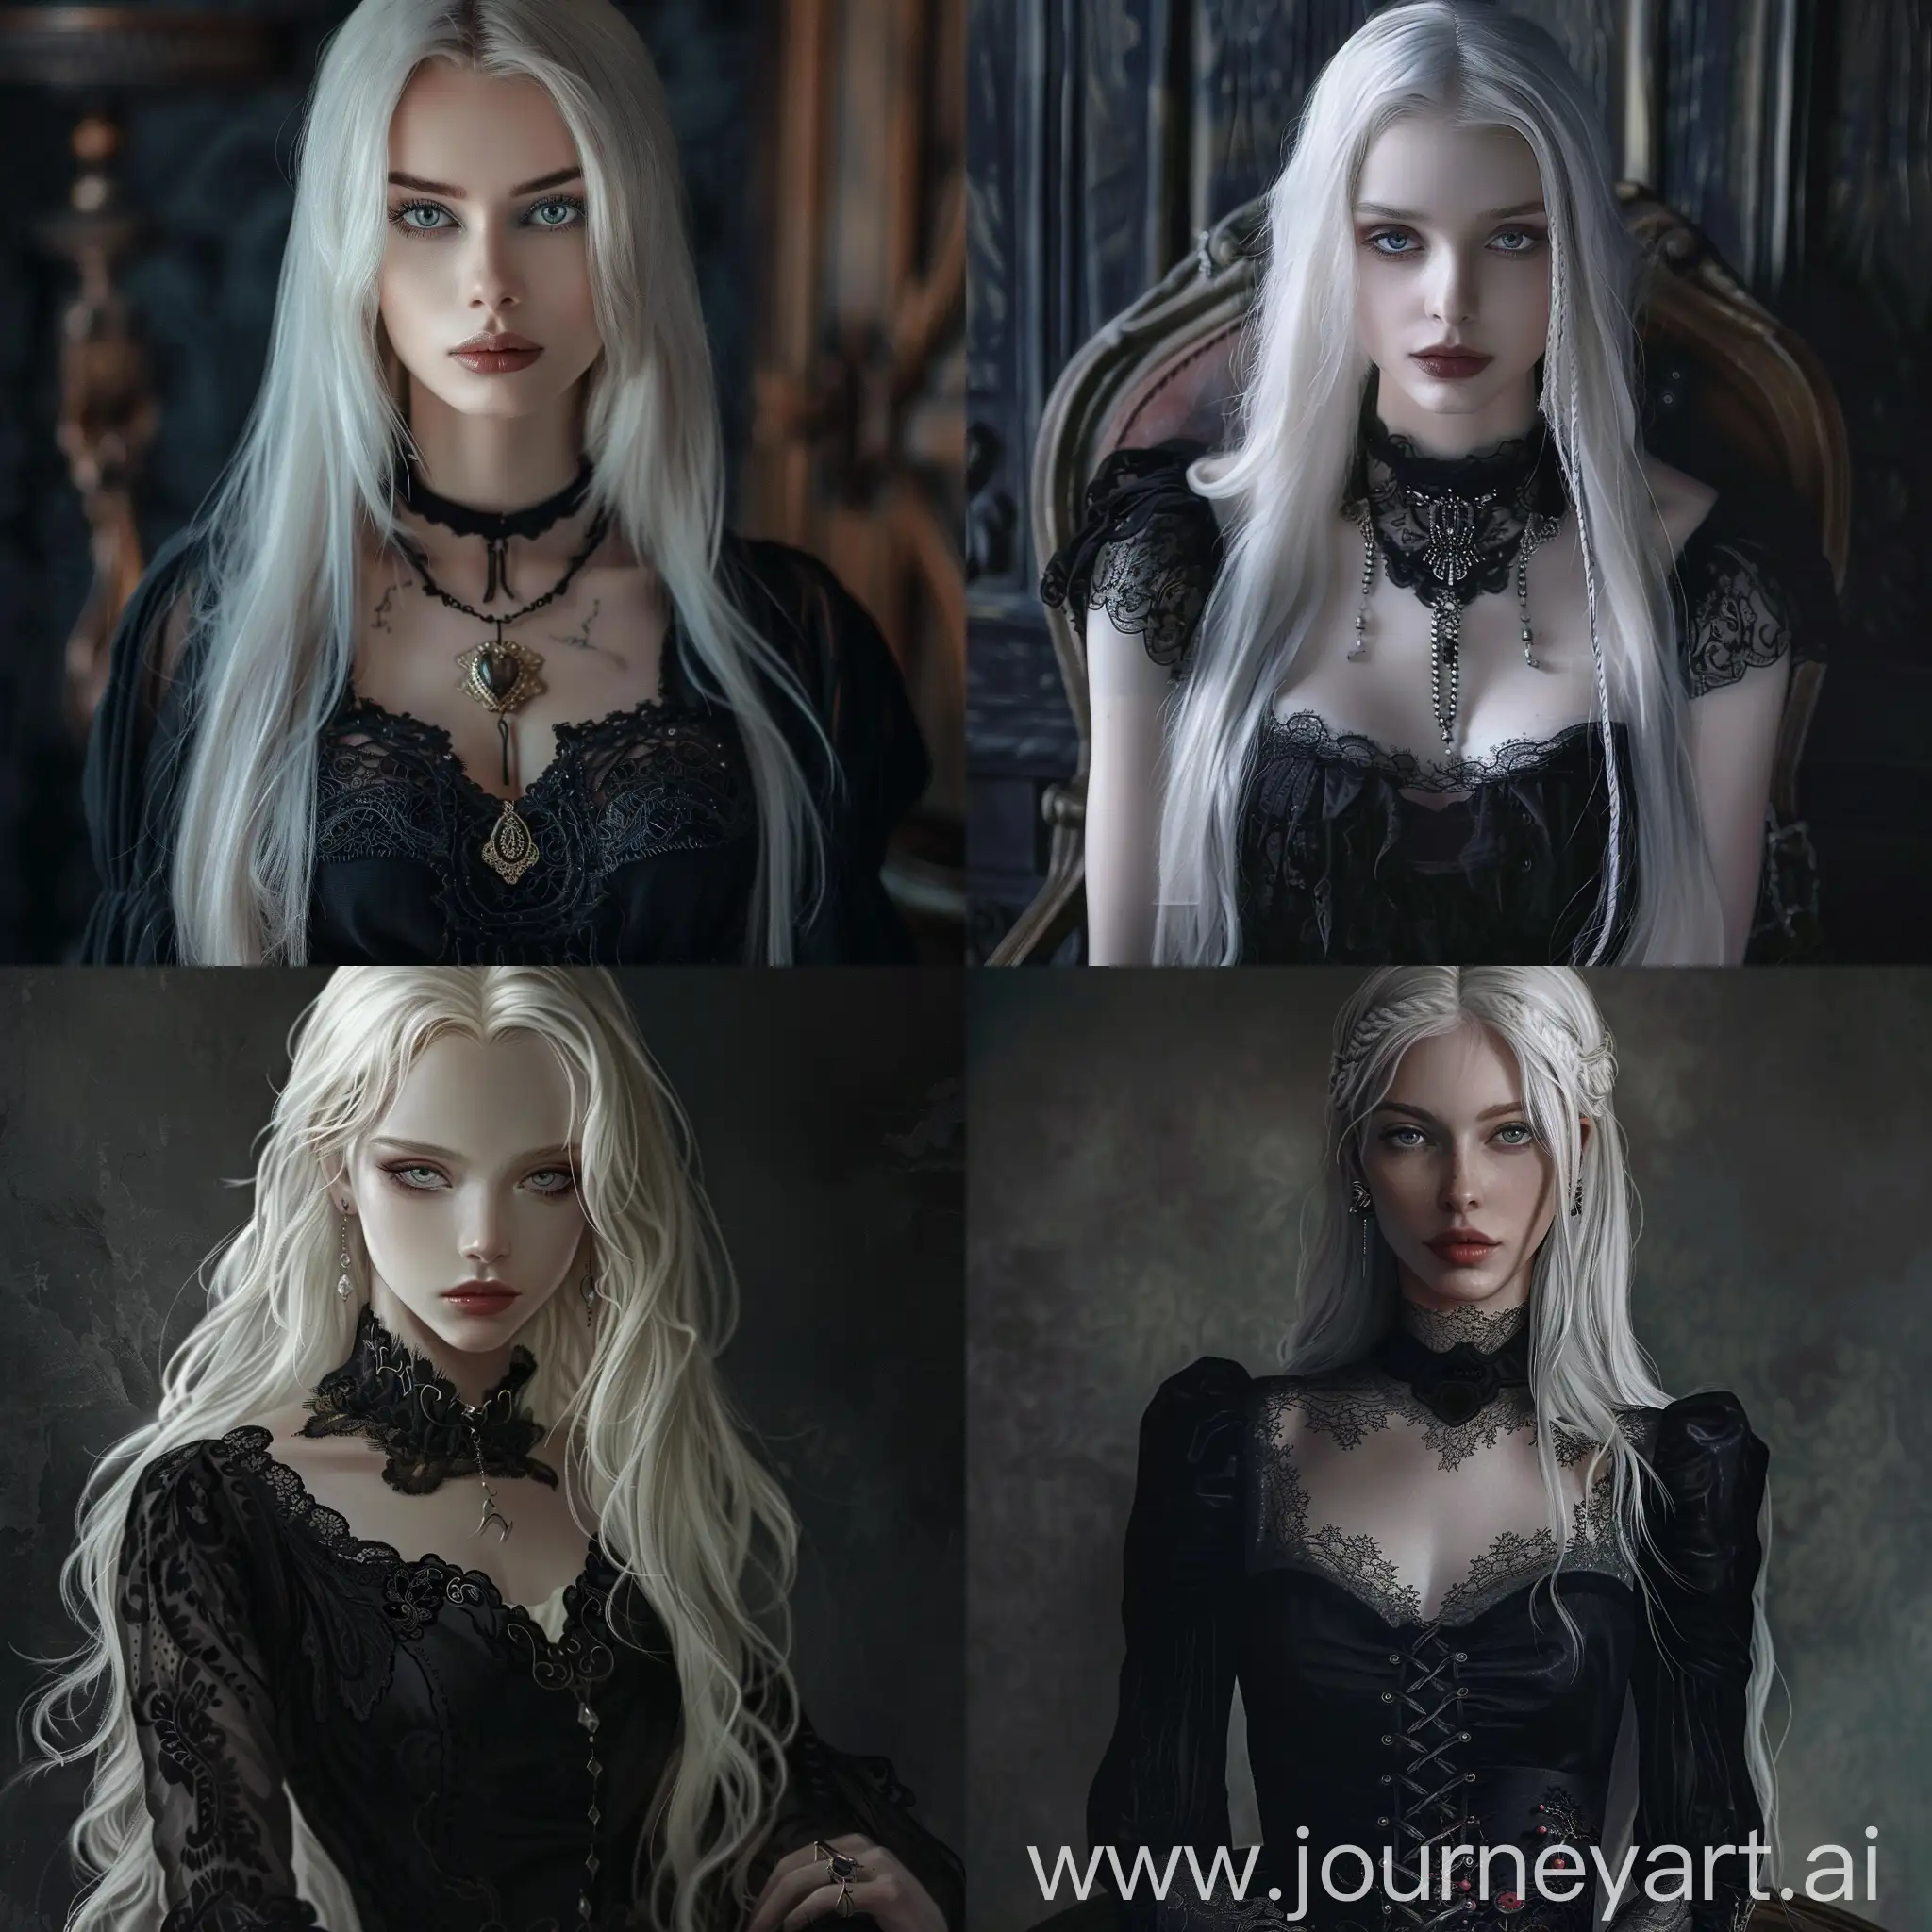 Woman: 25 years old: average height: toned build: broad shoulders: ample breasts: fair skin: indigo eyes: long straight white hair. She wears black dresses with embroidery, lace or leather. She prefers to wear rings on his fingers. The voice is calm, velvety. The character is calm, domineering, wise.